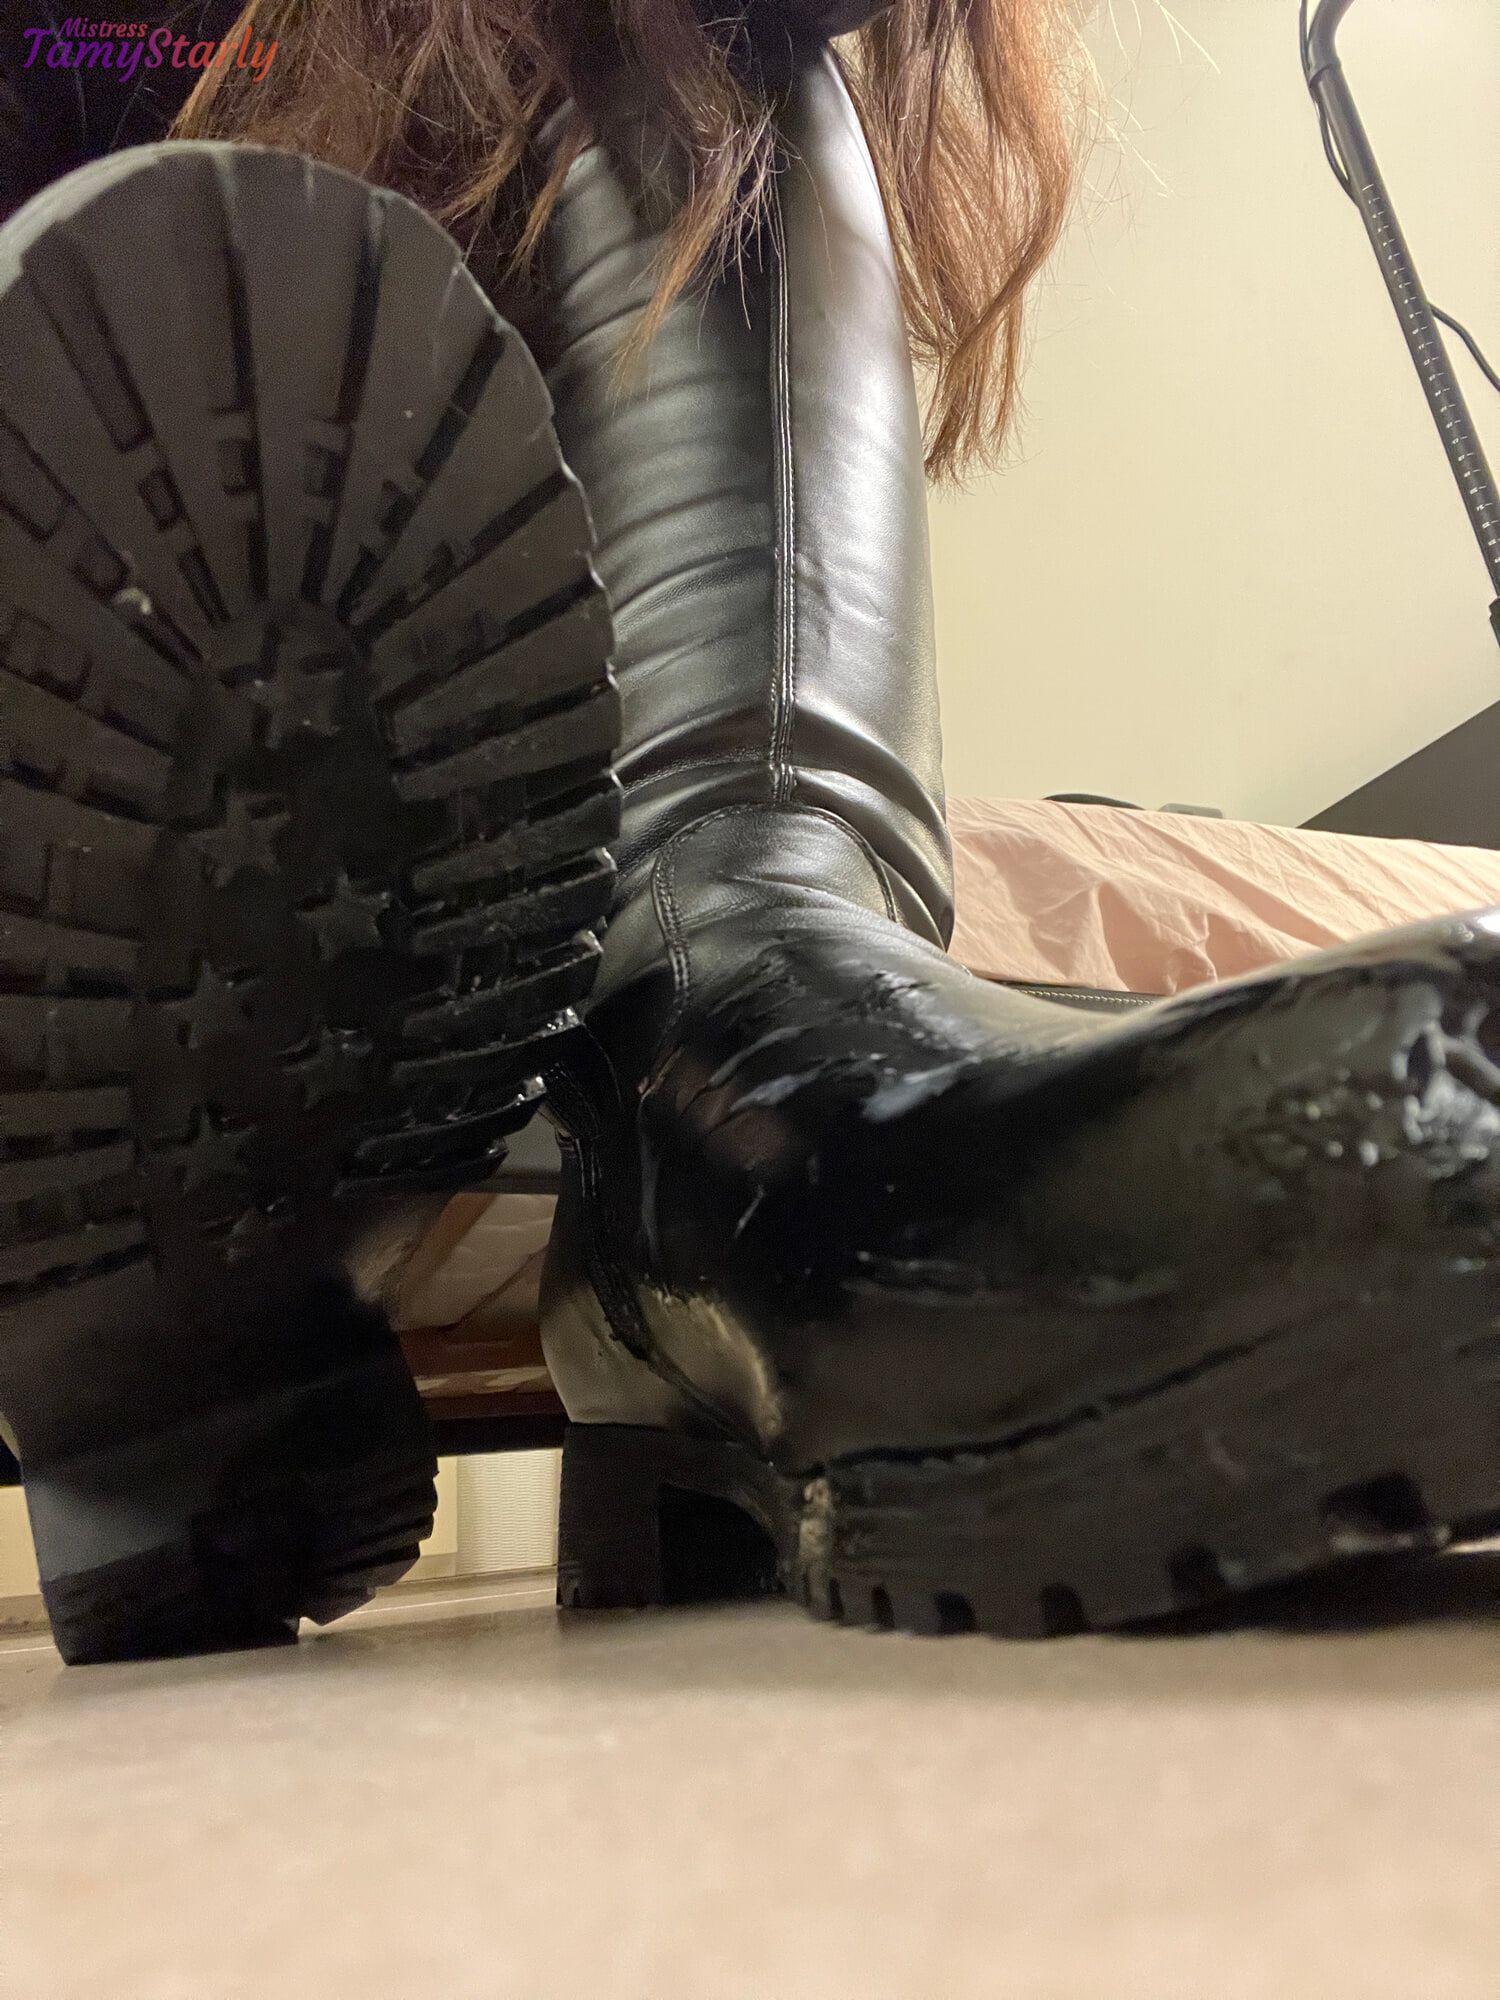 March & Blast in Super Thigh Boots - Ball Stomp, Bootjob #4